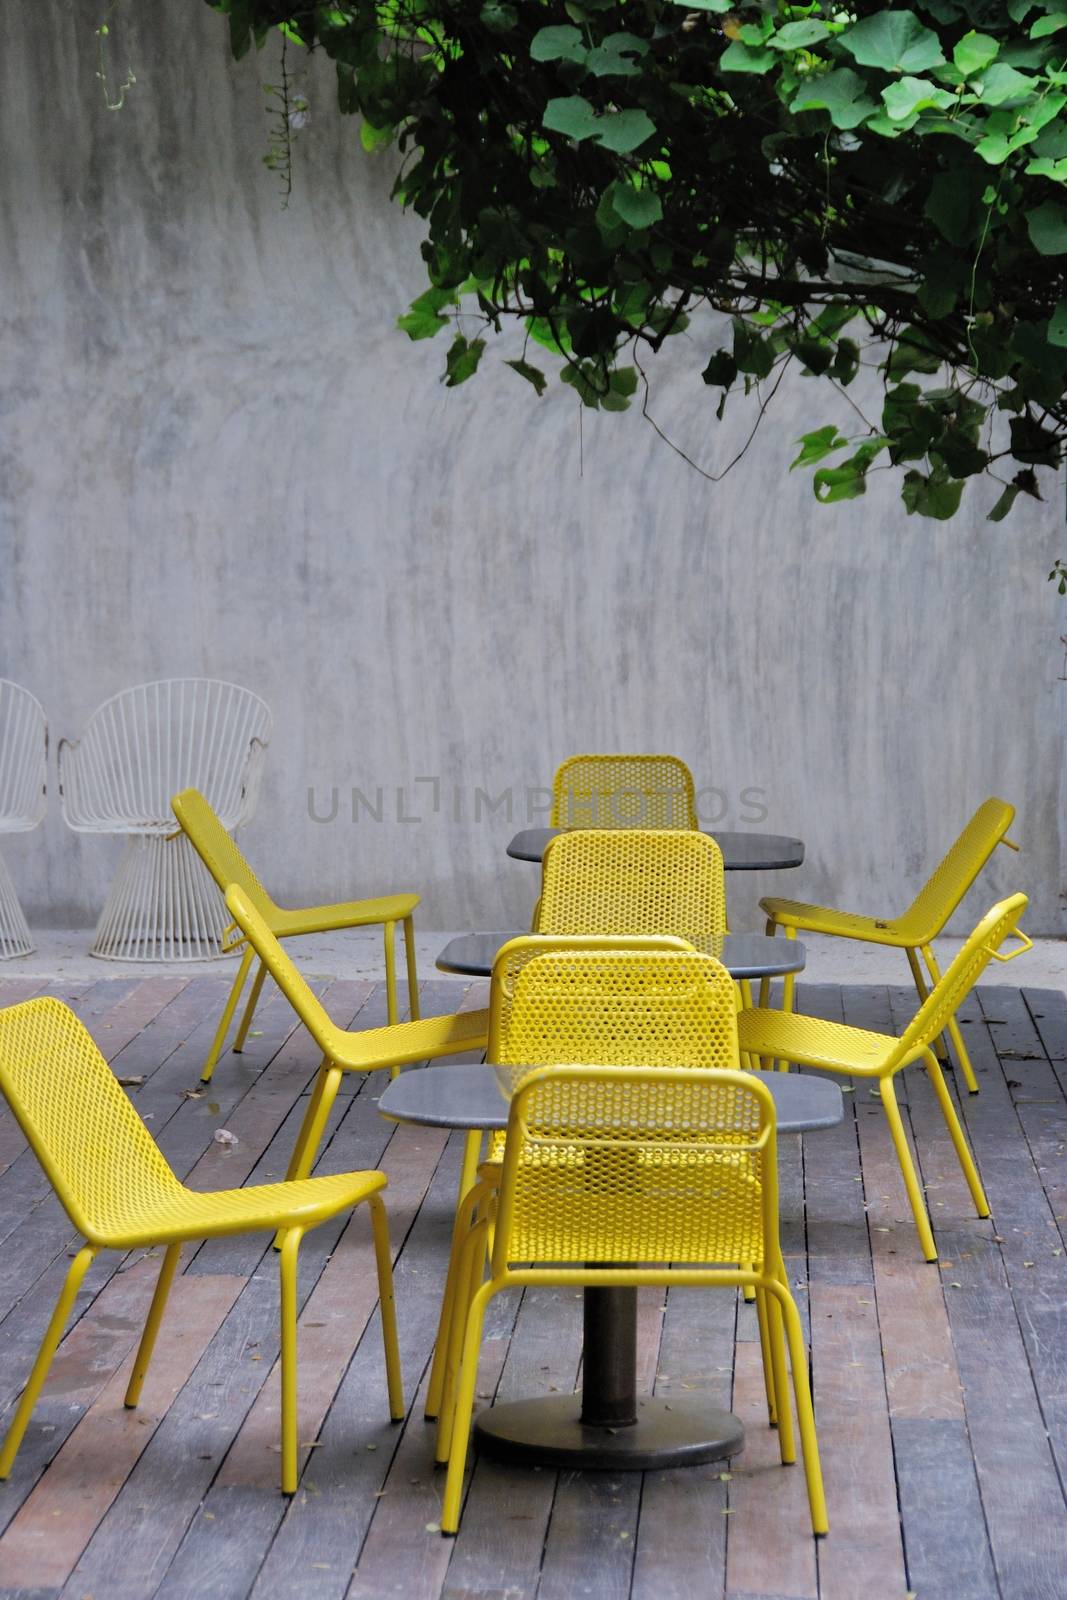 yellow steel chair by untouchablephoto